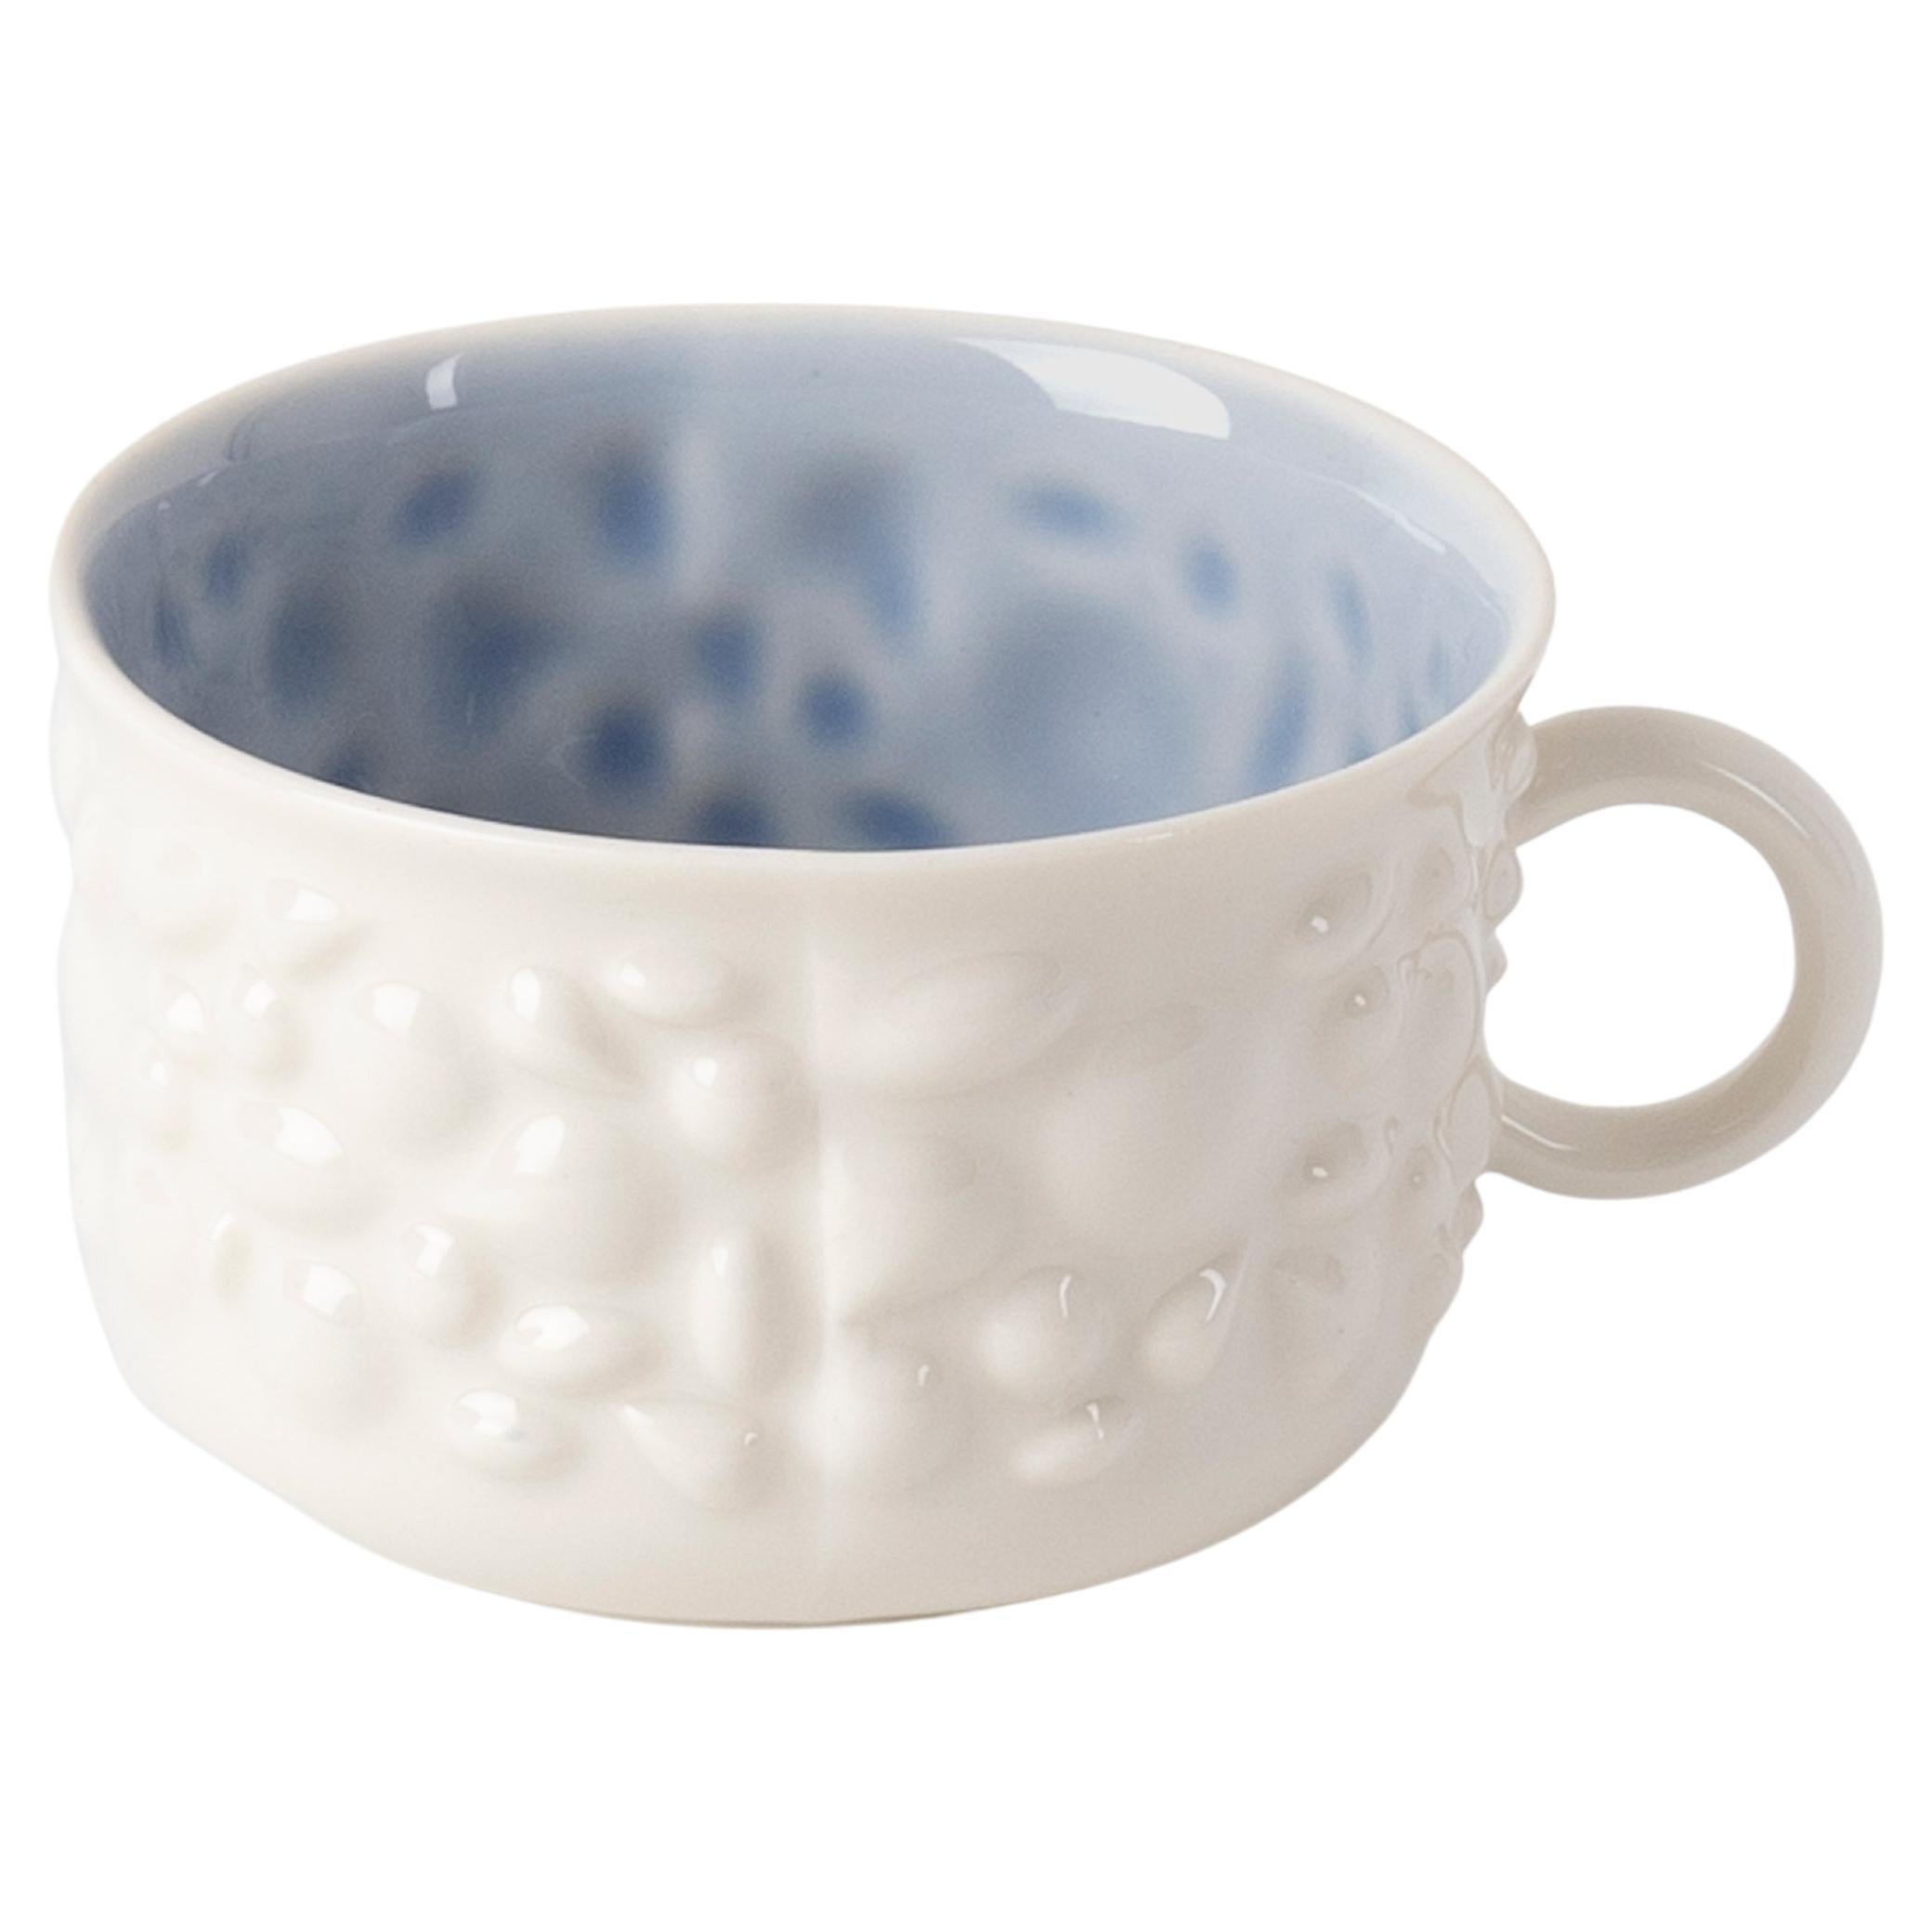 Contemporary Modern, Justine Porcelain Cappuccino Cup with handle, White & Blue For Sale